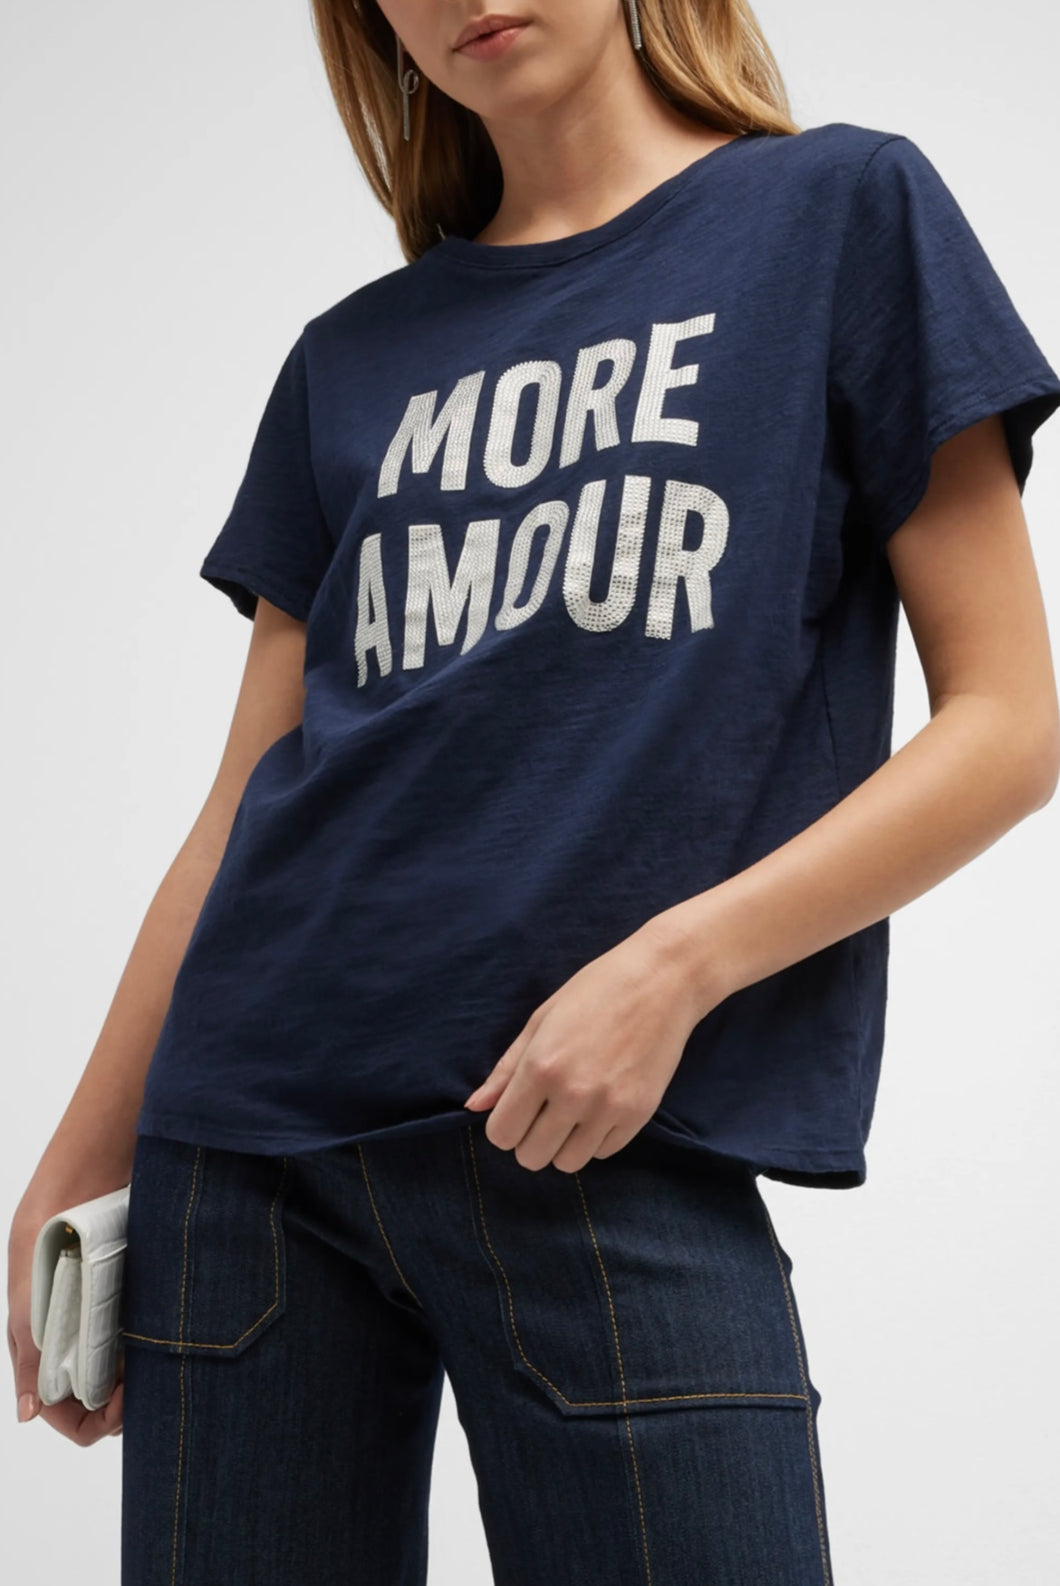 Cizr71223 More Amour Tee